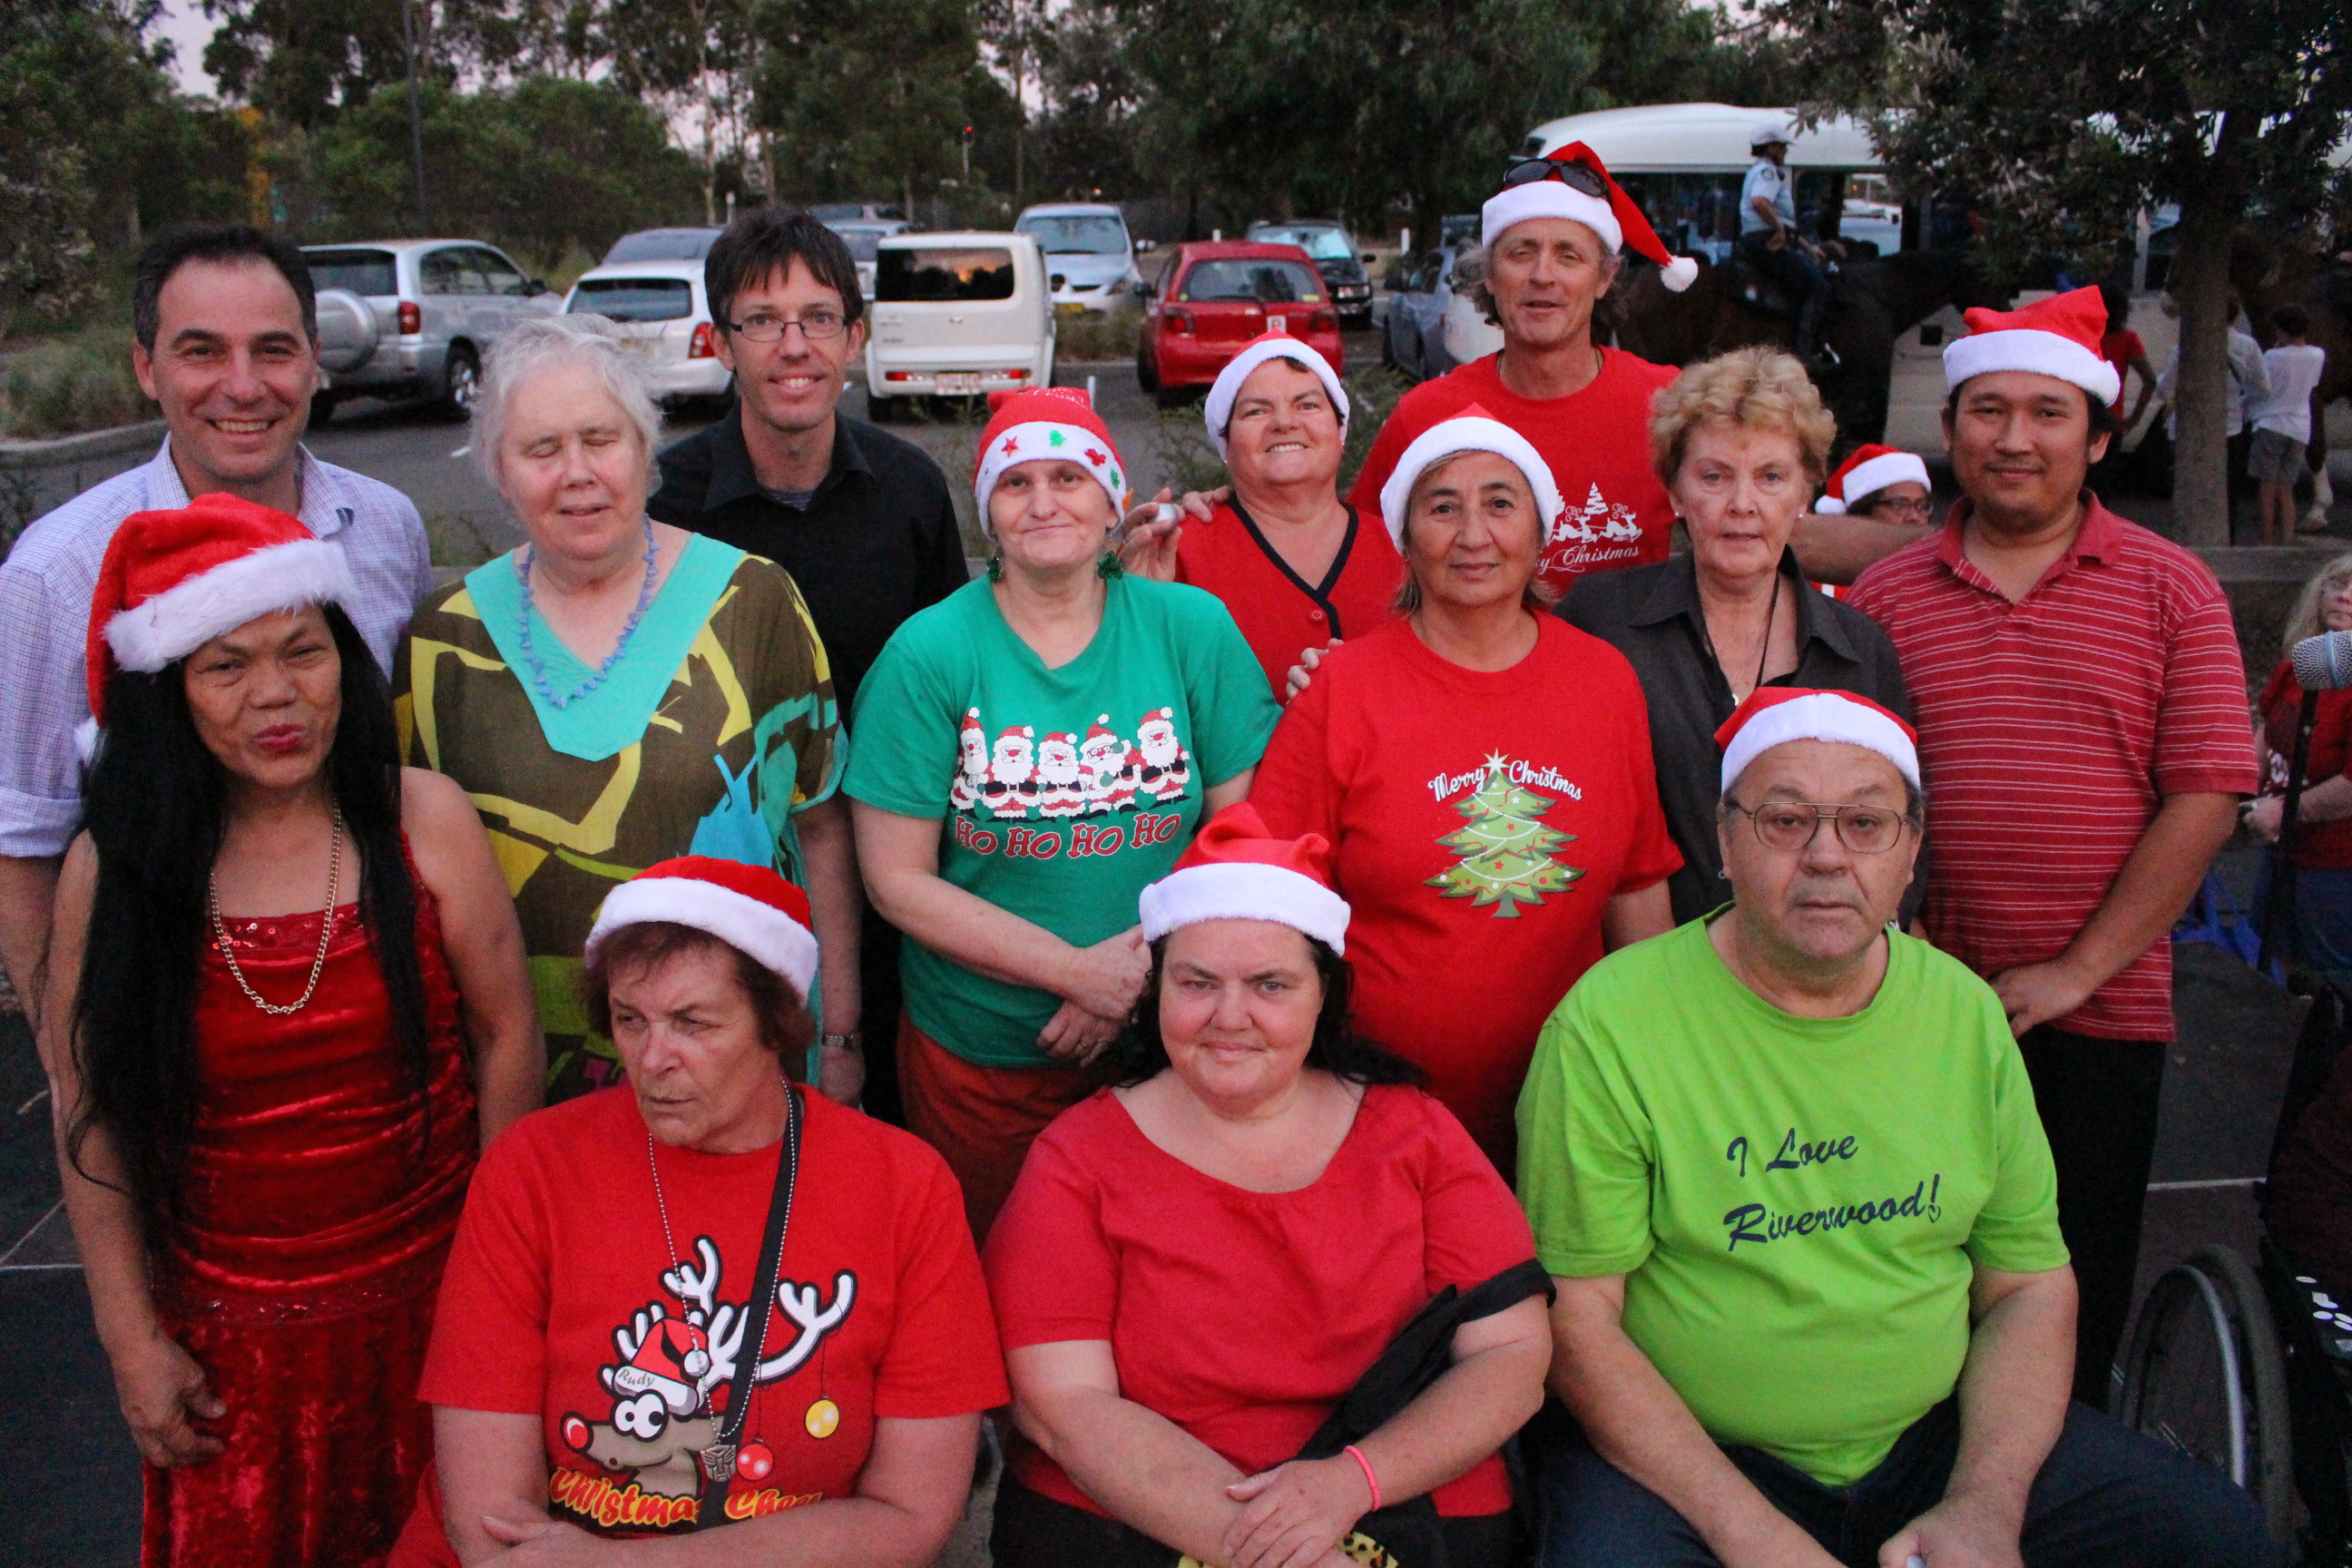 Special guests to appear at Riverwood Christmas Carols in the Wetlands